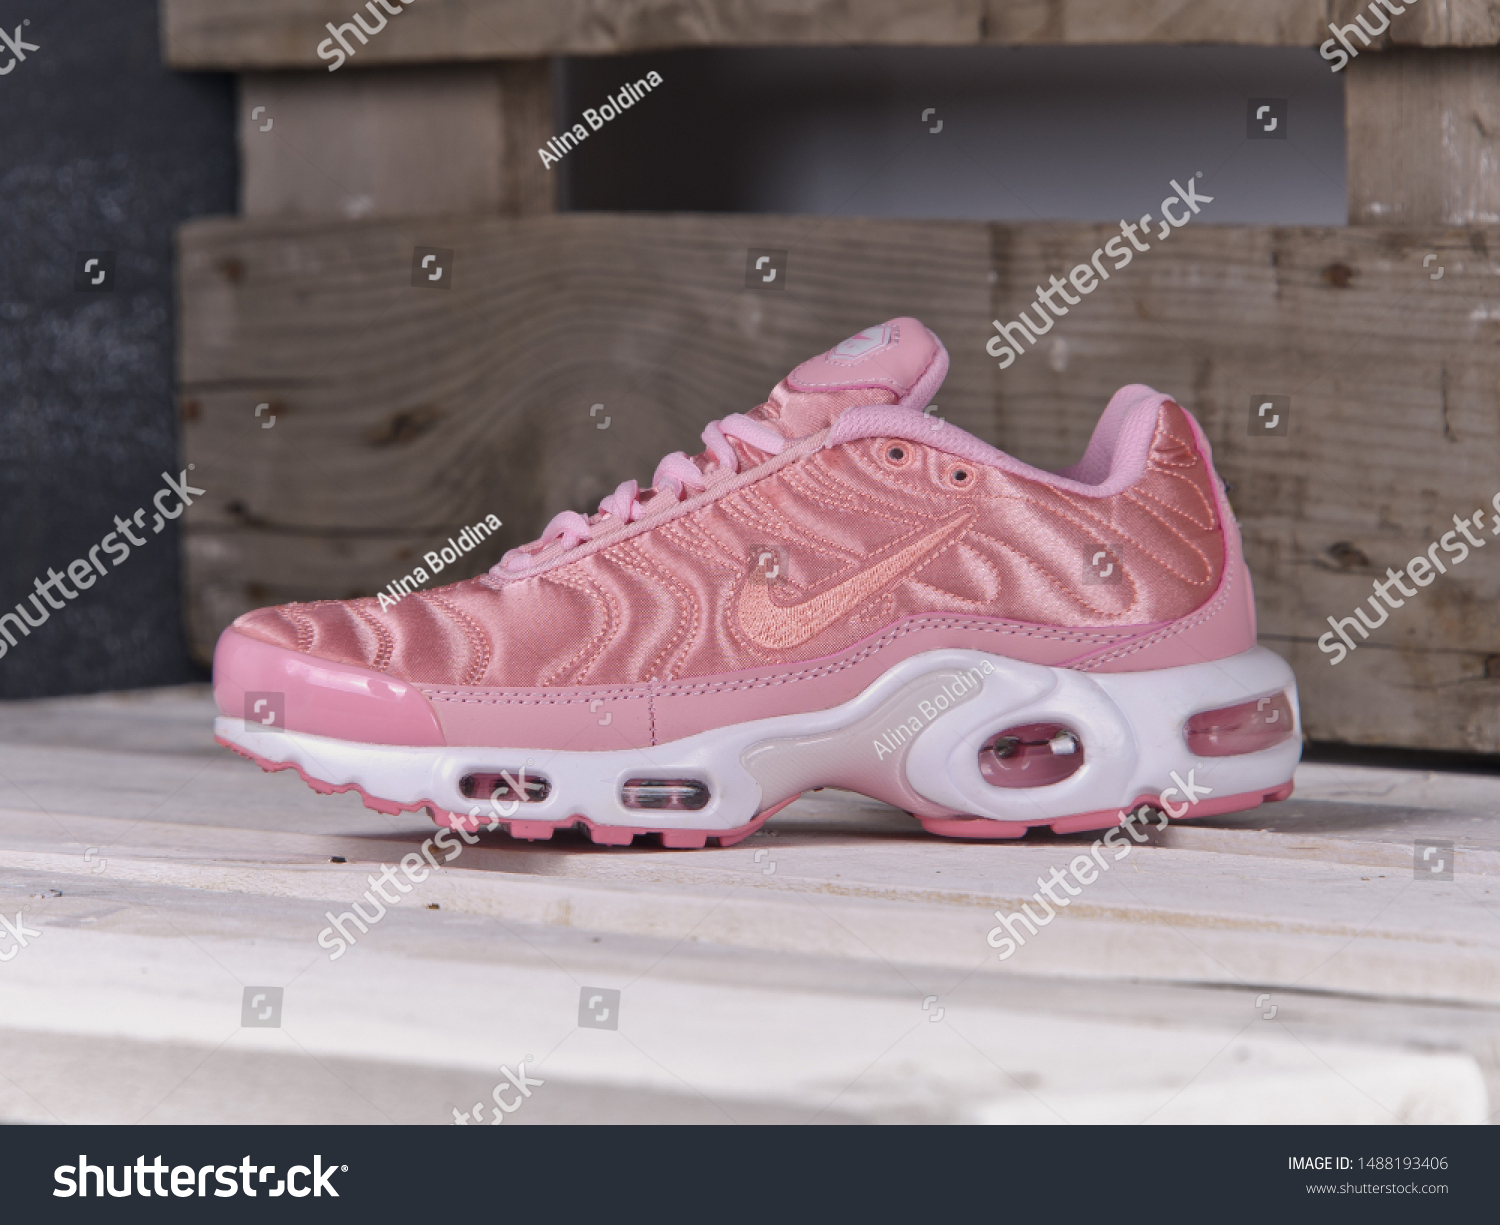 pink tn trainers